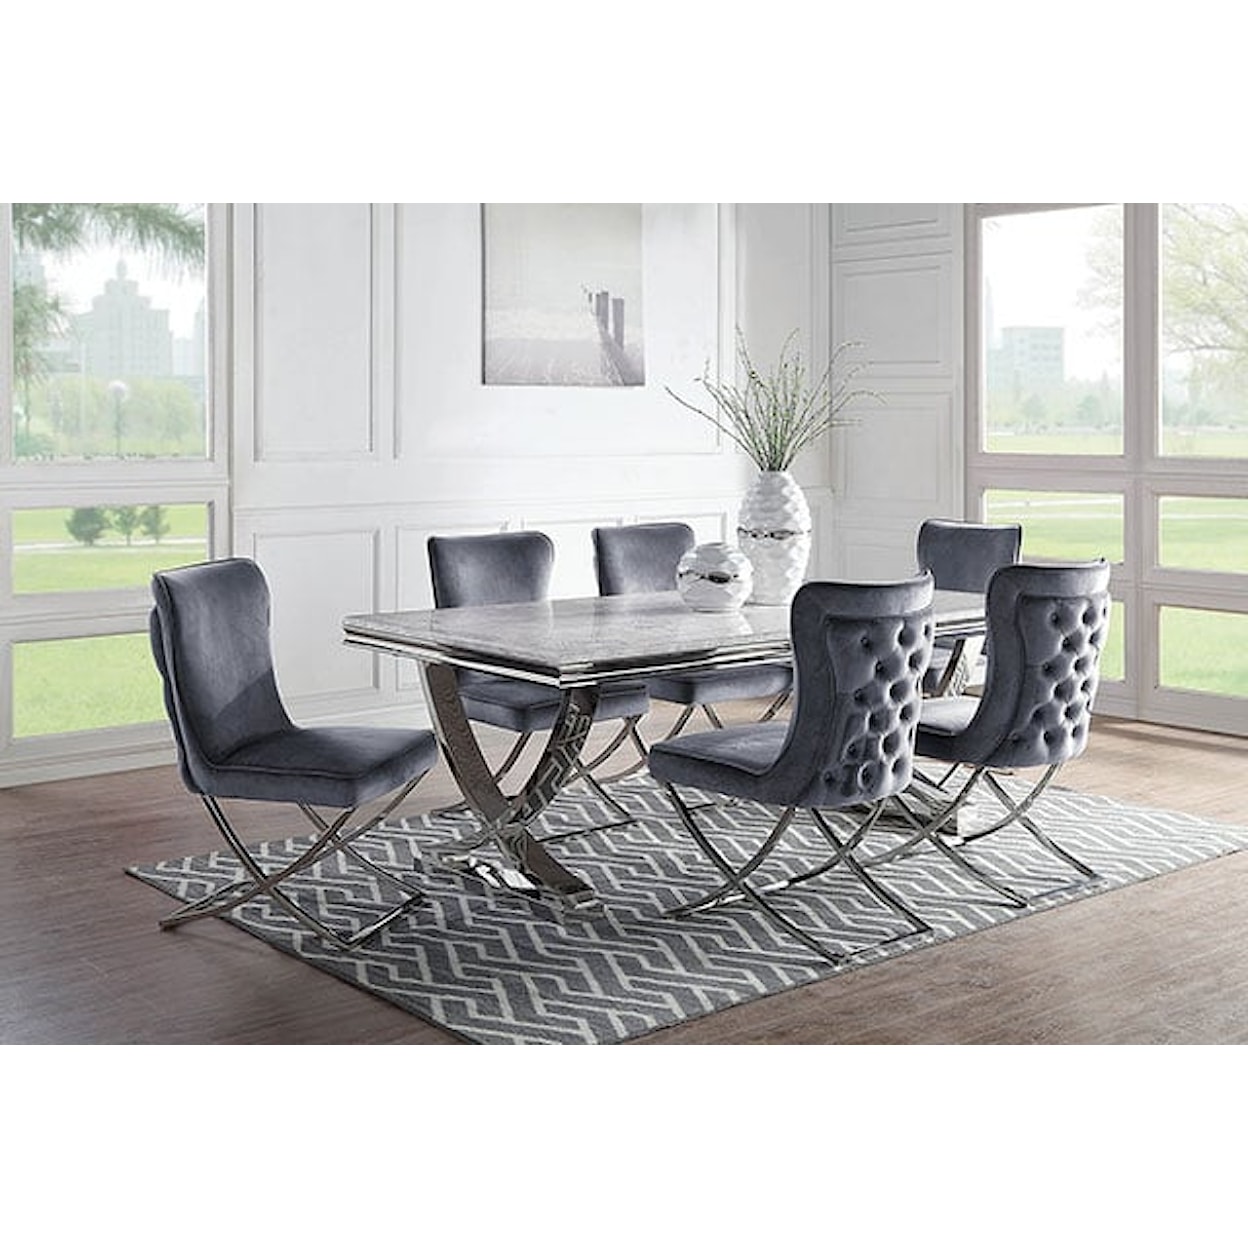 Furniture of America - FOA Wadenswil Dining Chair & Bench